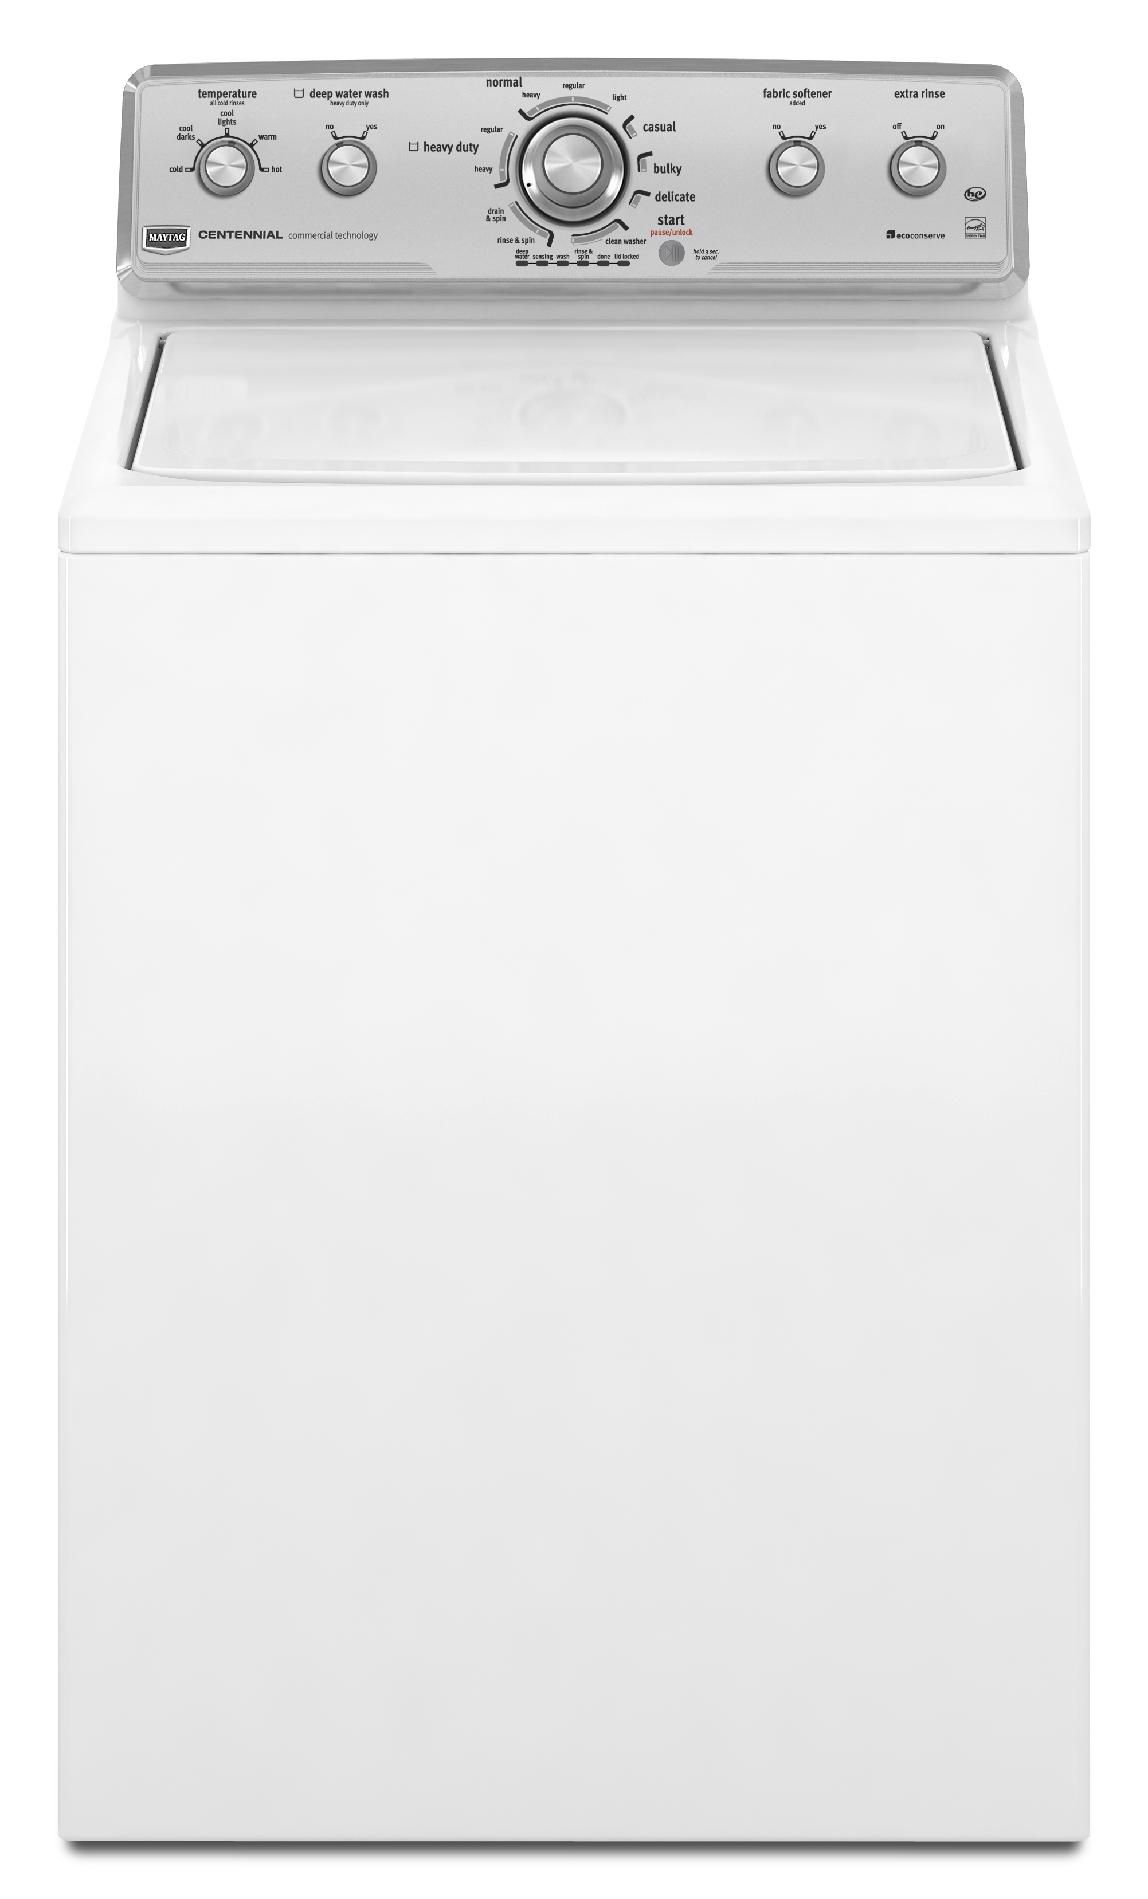 Maytag 3.4 cu. ft. Centennial Top-Load Washer w/ Deep Water Wash - White Less than 4 cu. ft.